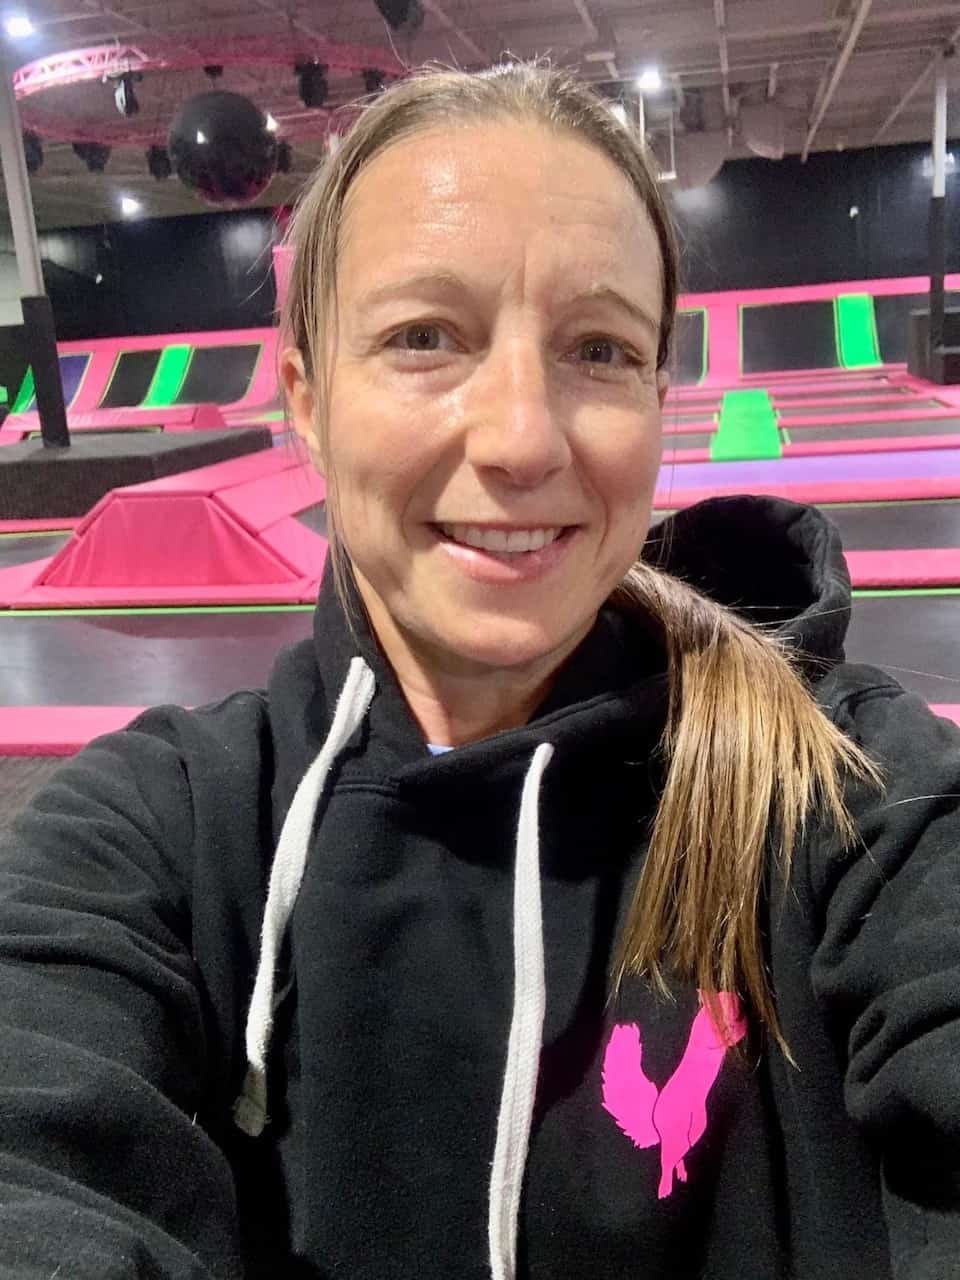 Flying Squirrel Trampoline Selfie - The Flying Squirrel Indoor Trampoline Park in Hamilton, Ontario, Canada is one of my favourite places to jump! It is a fun way to be active and get a great workout!